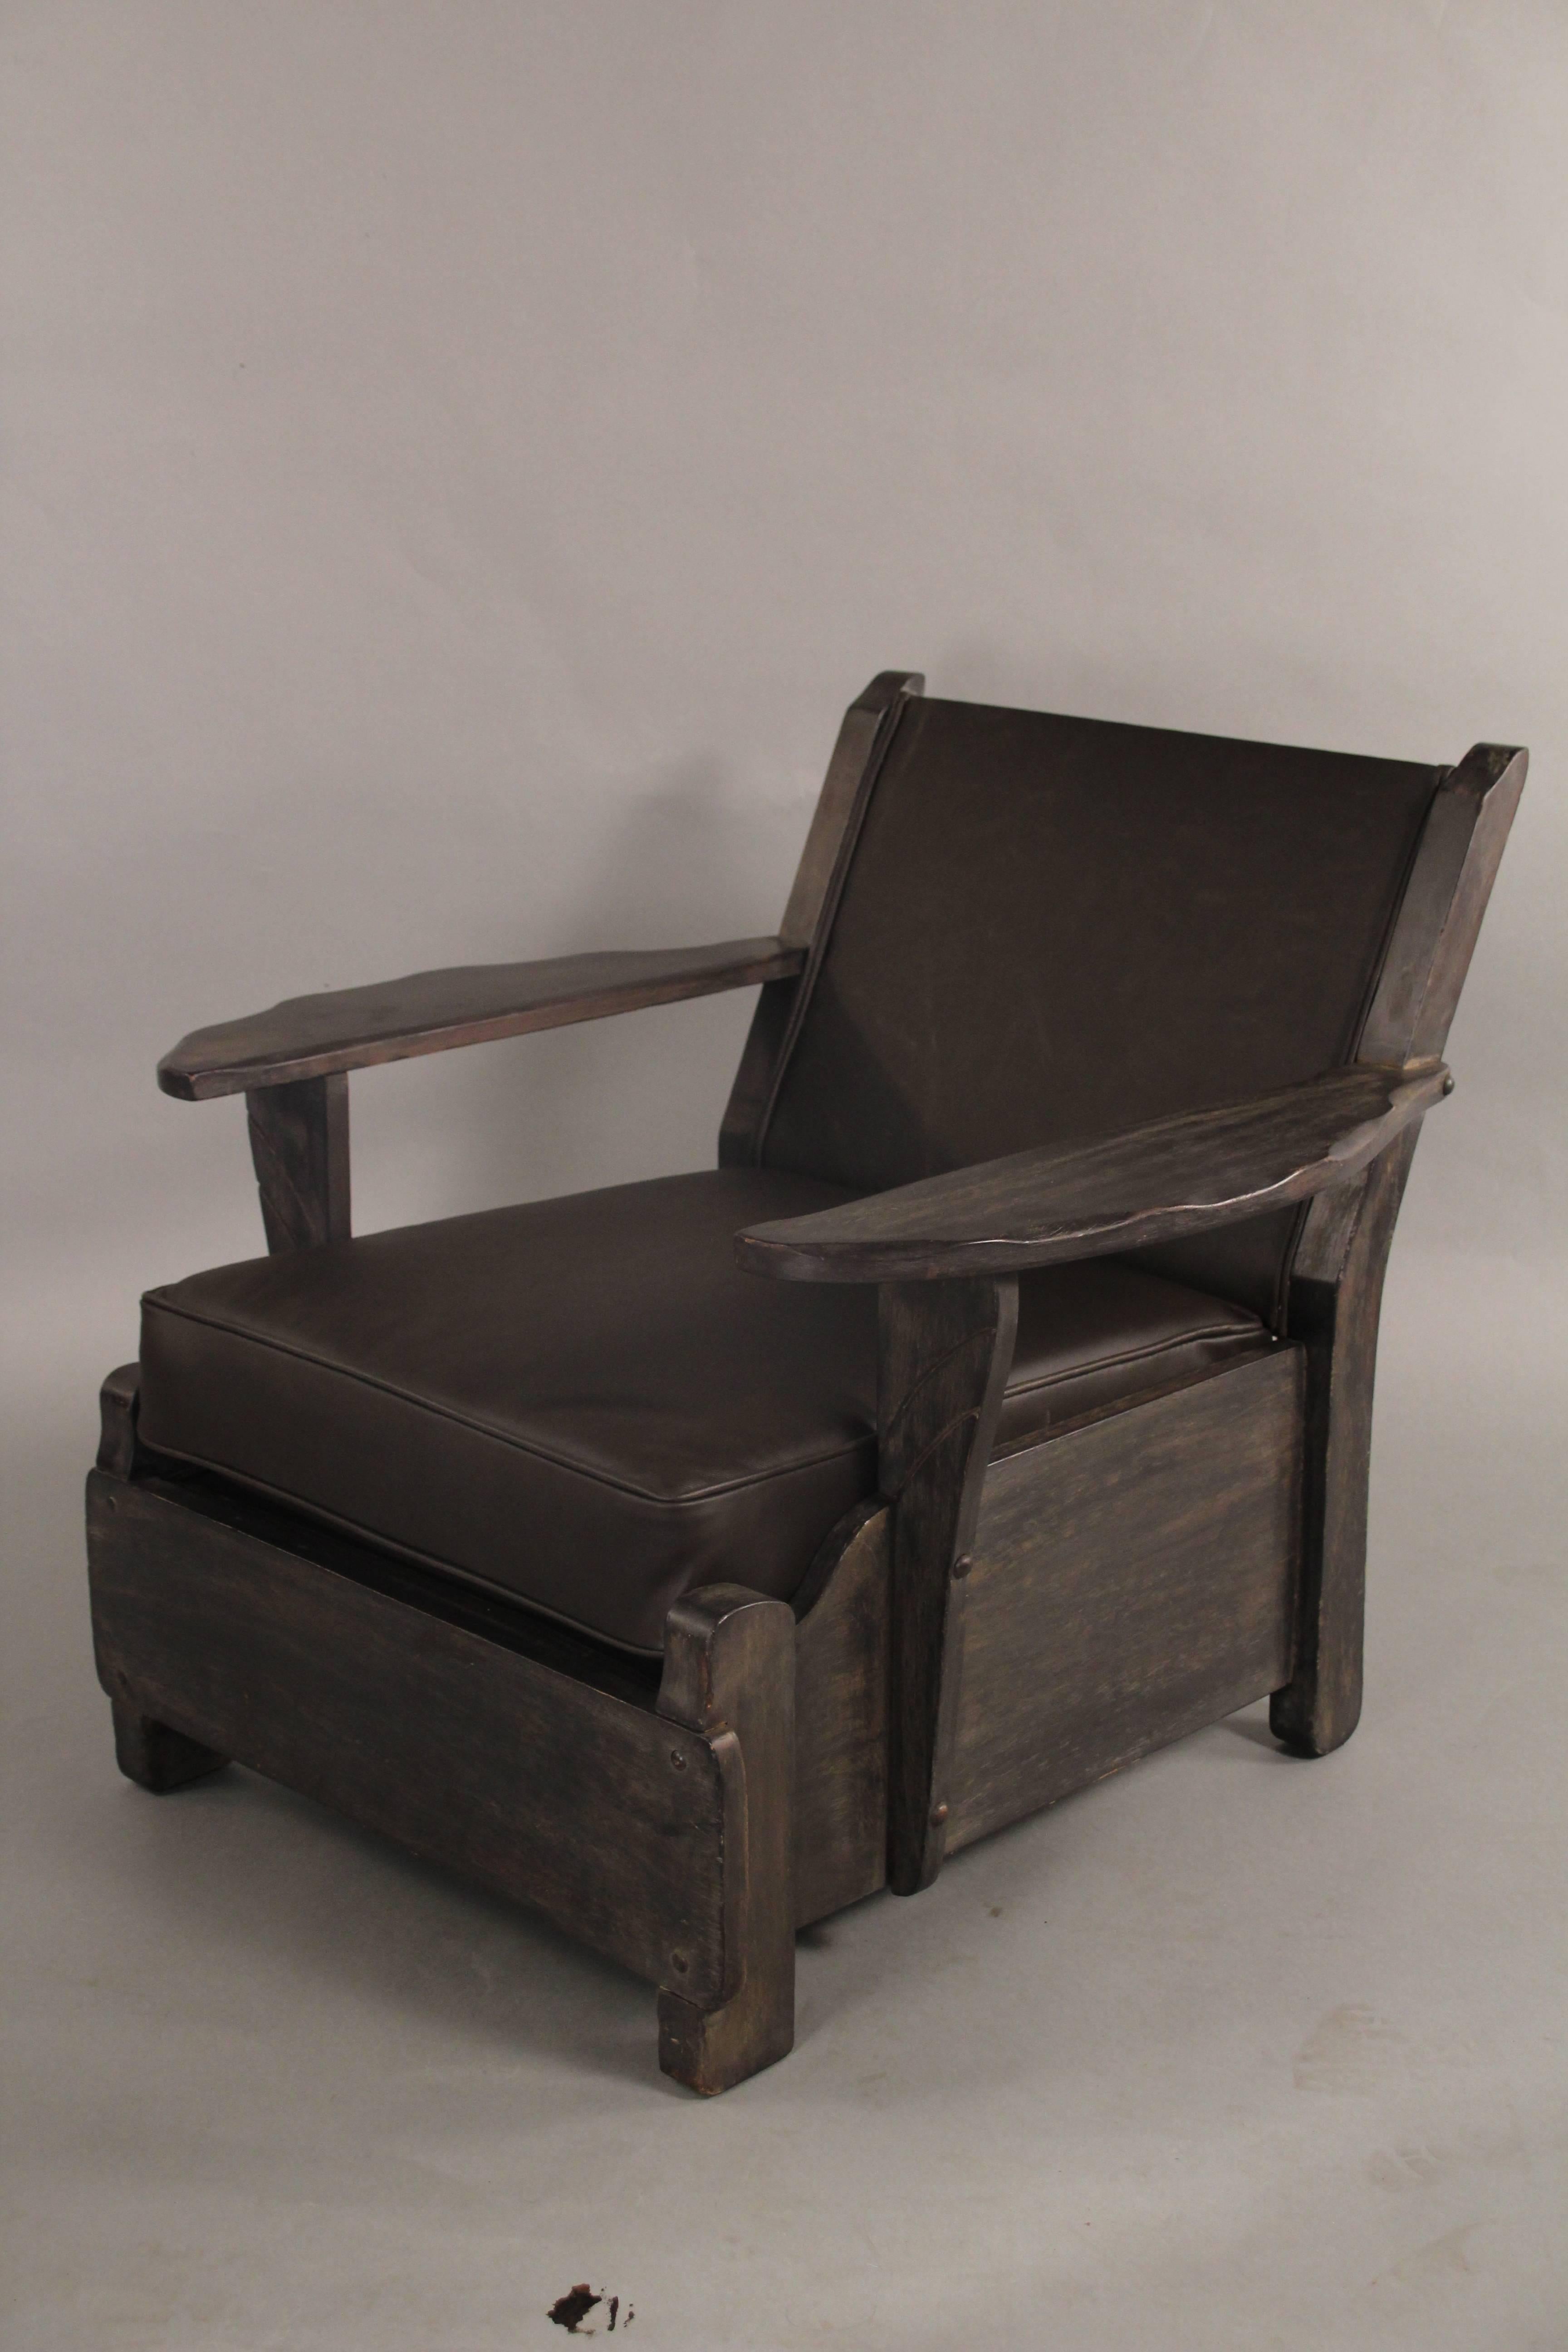 American Antique Rancho Monterey Period Armchair with New Leather Upholstery, circa 1930s